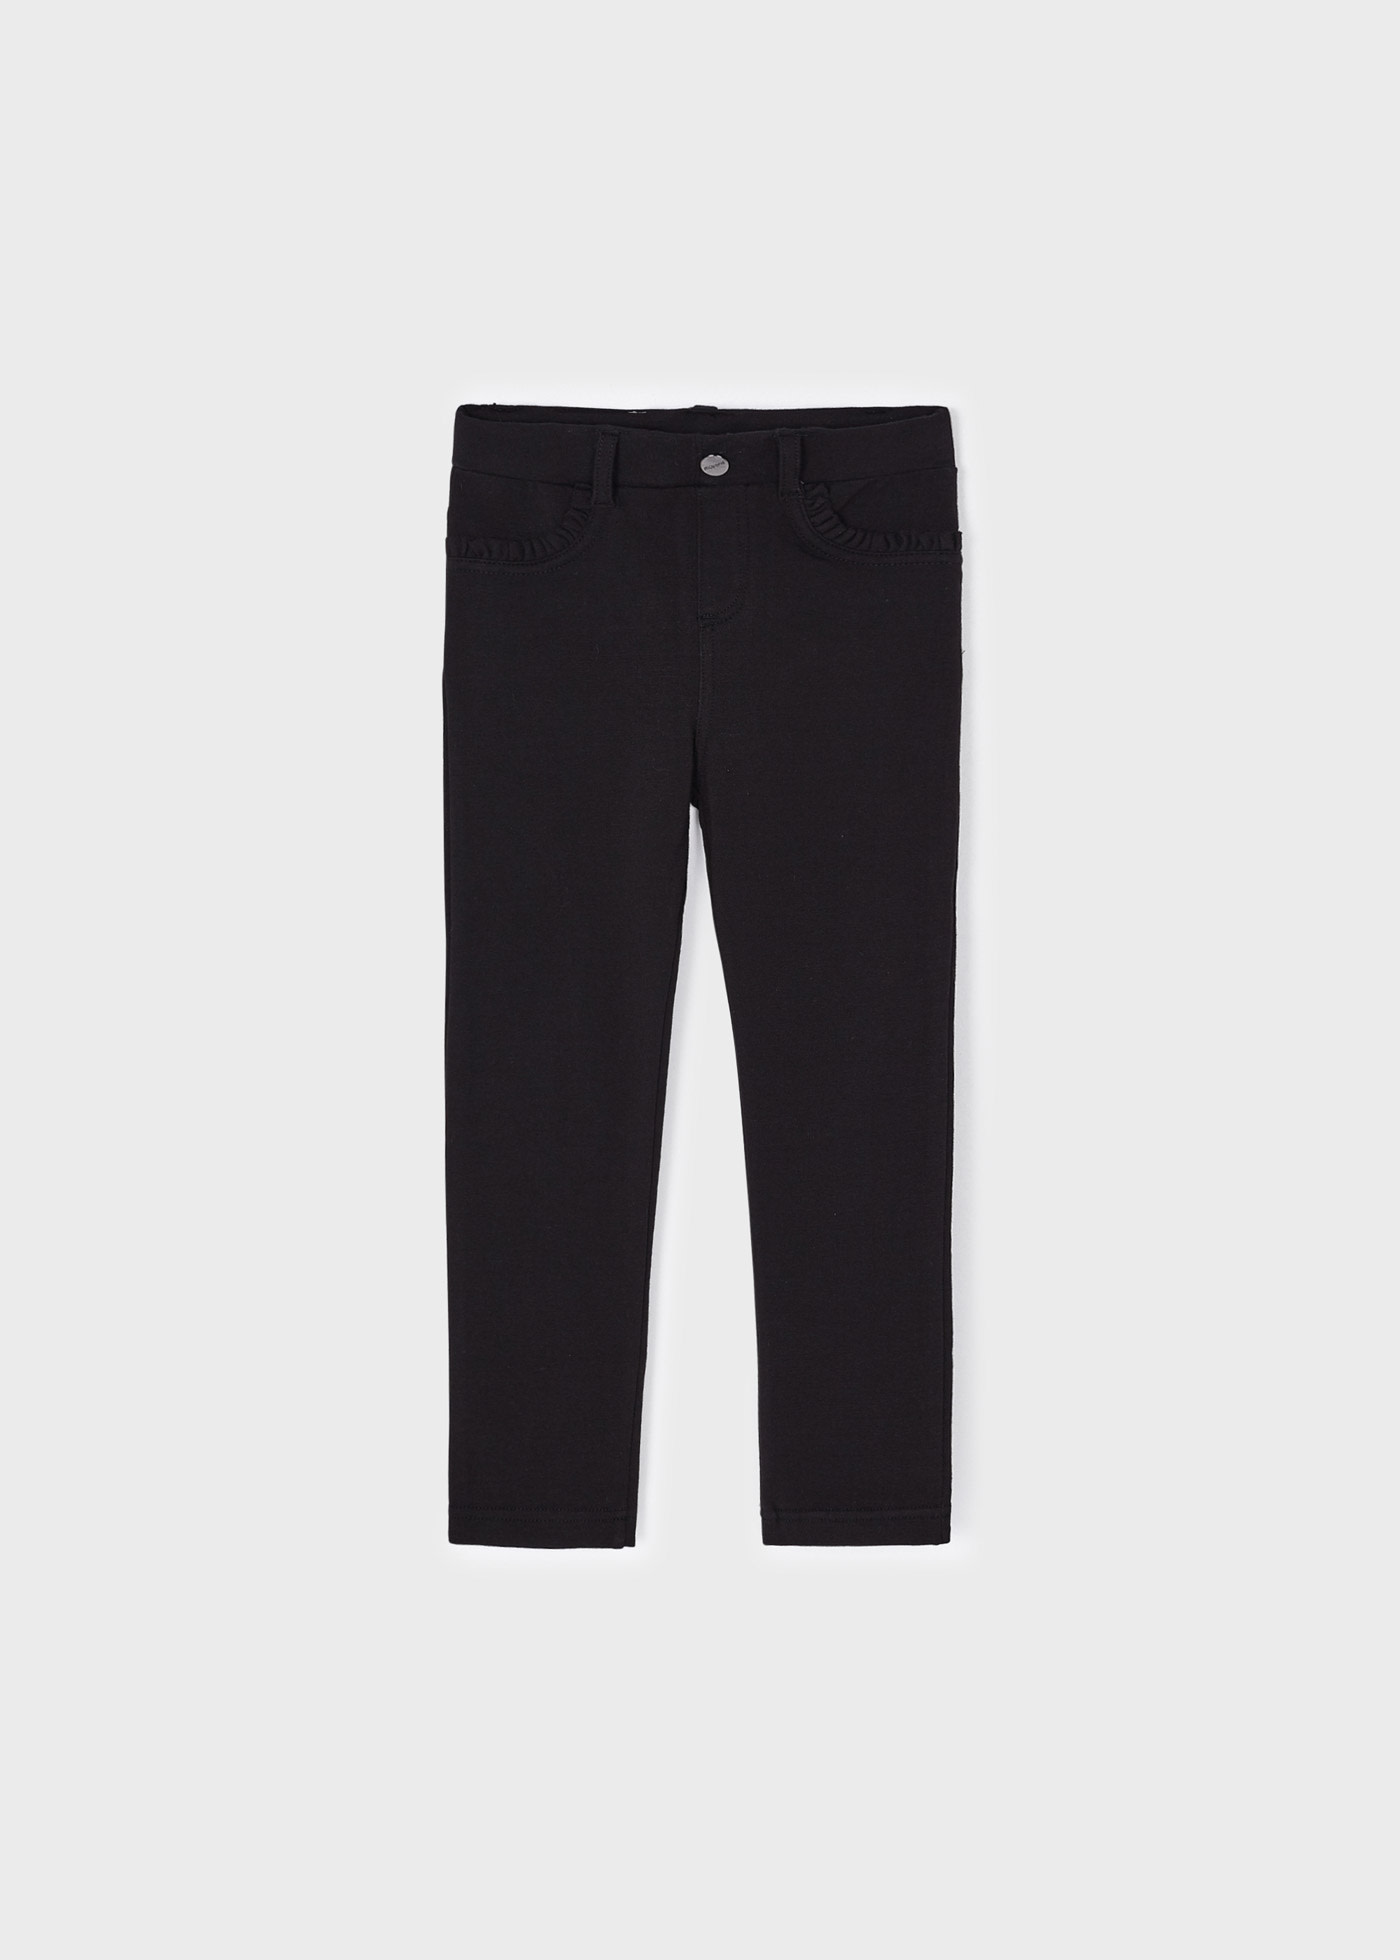 Topman check super skinny trousers in grey and blue | ASOS